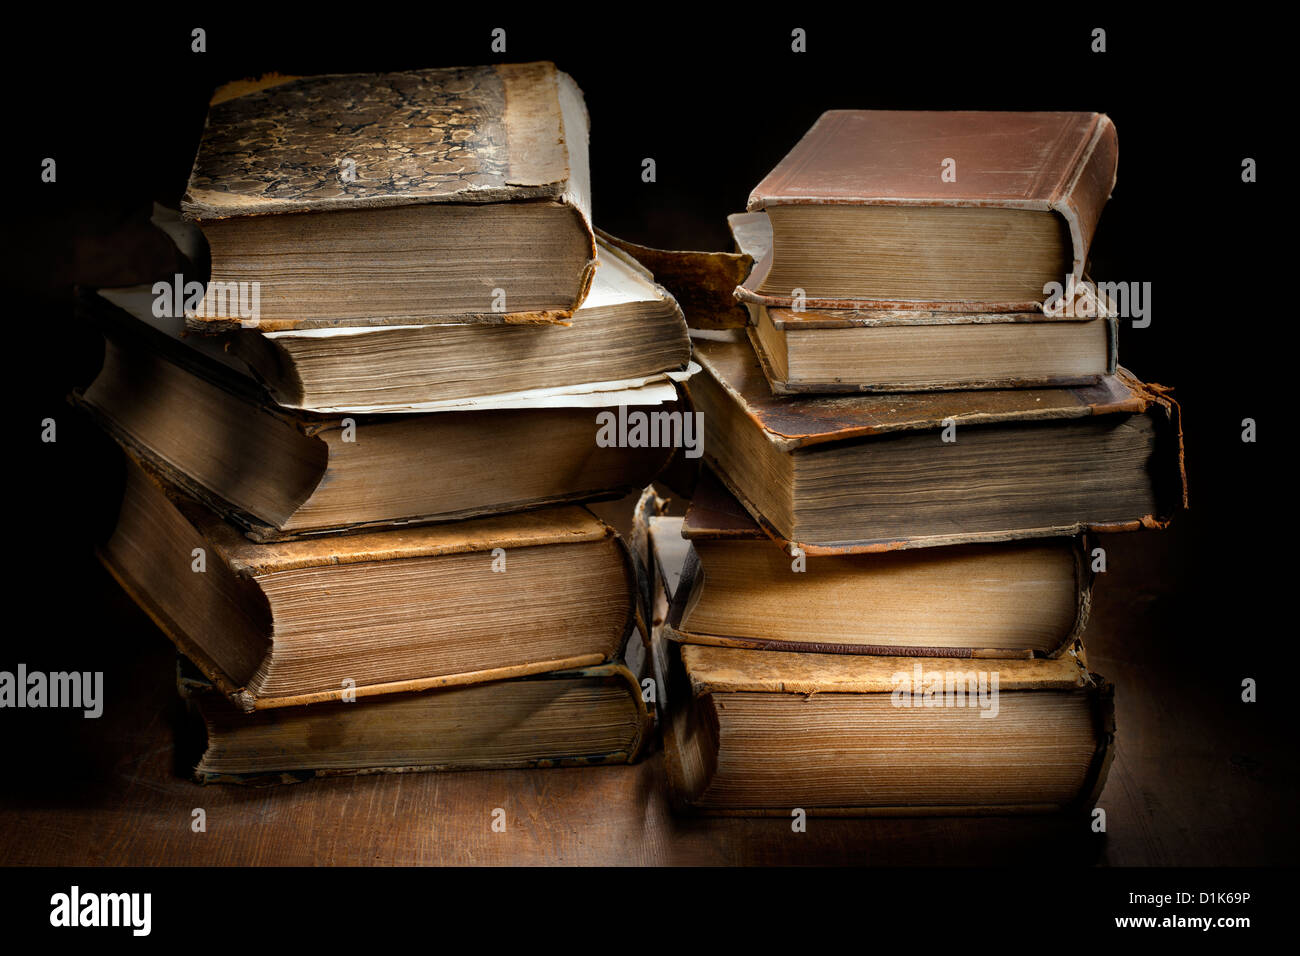 Dark and moody photograph od two stacks of old worn antique books. Stock Photo